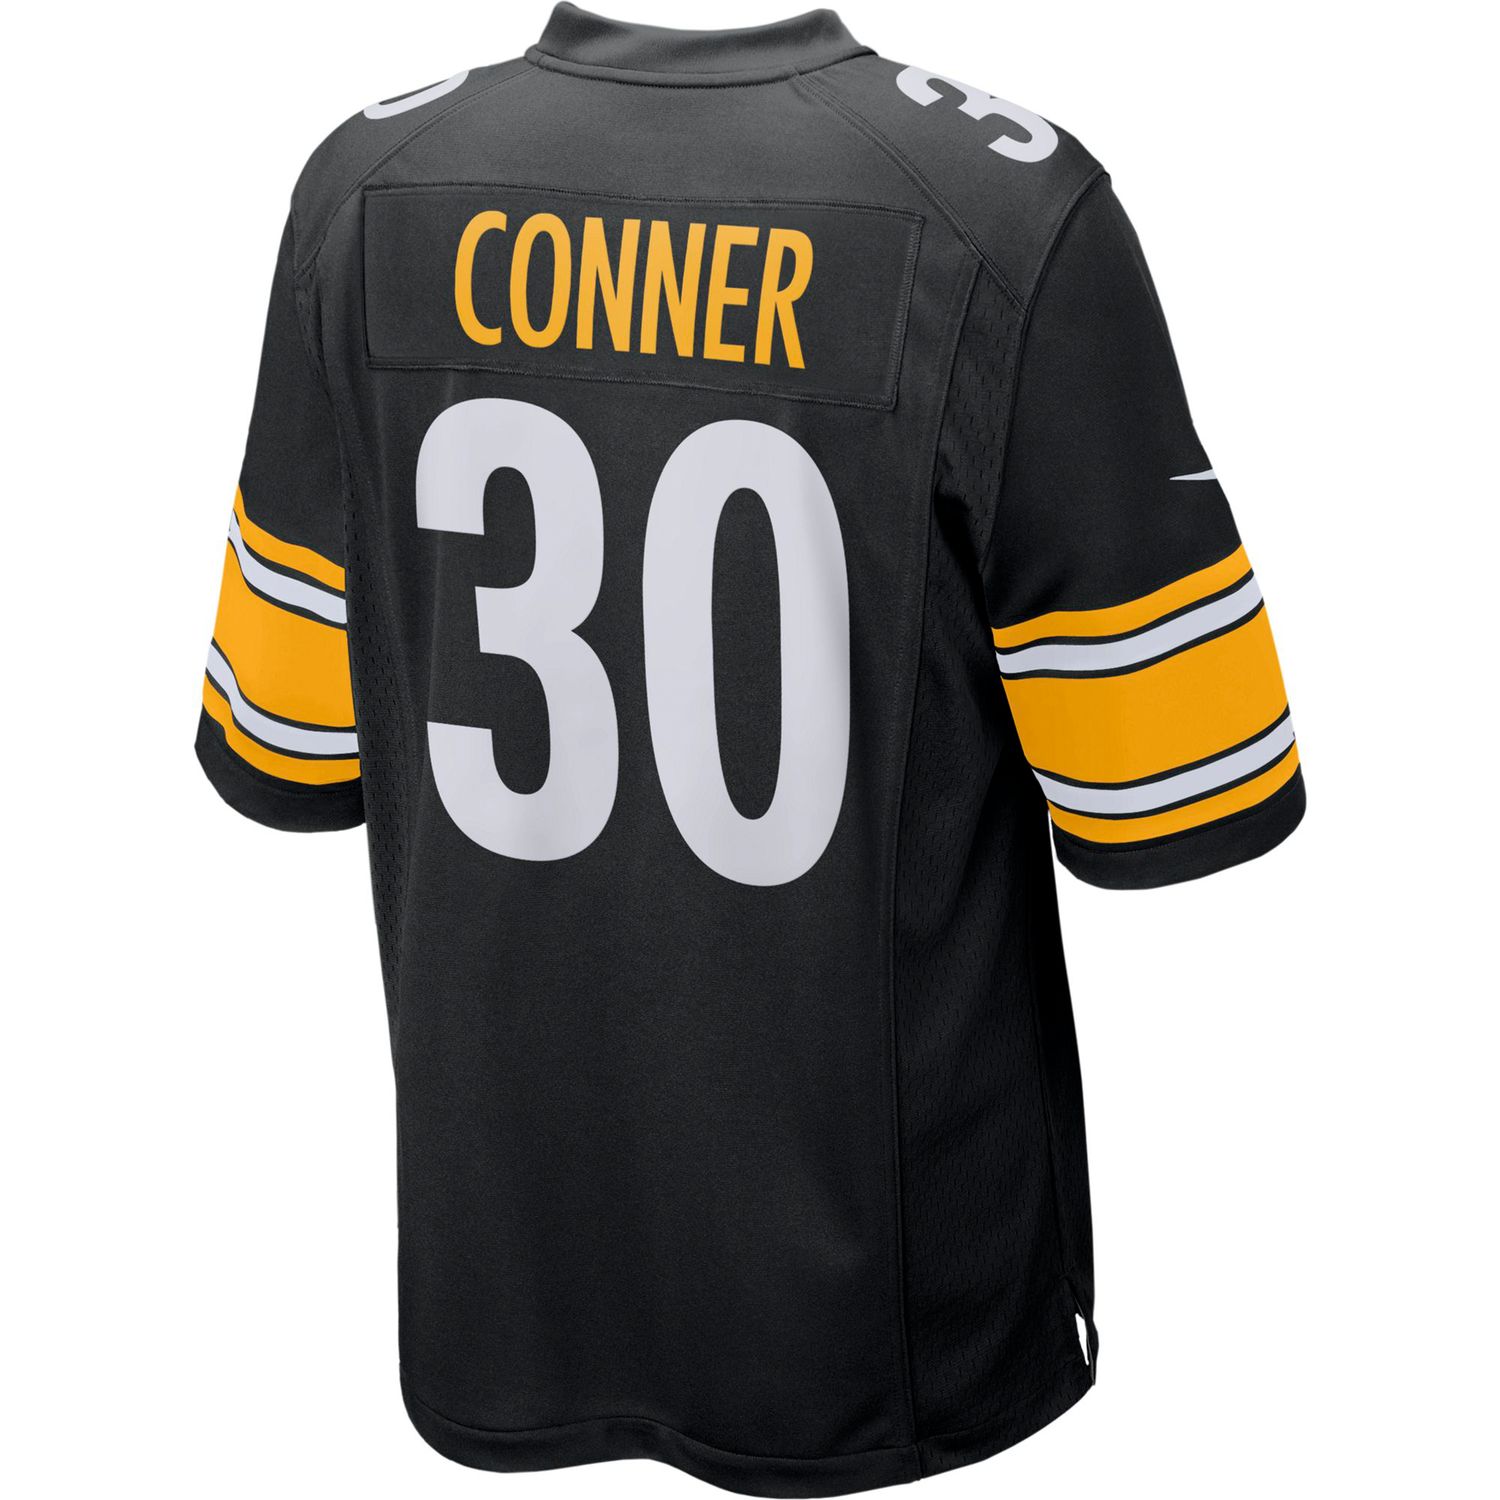 james conner jersey amazon